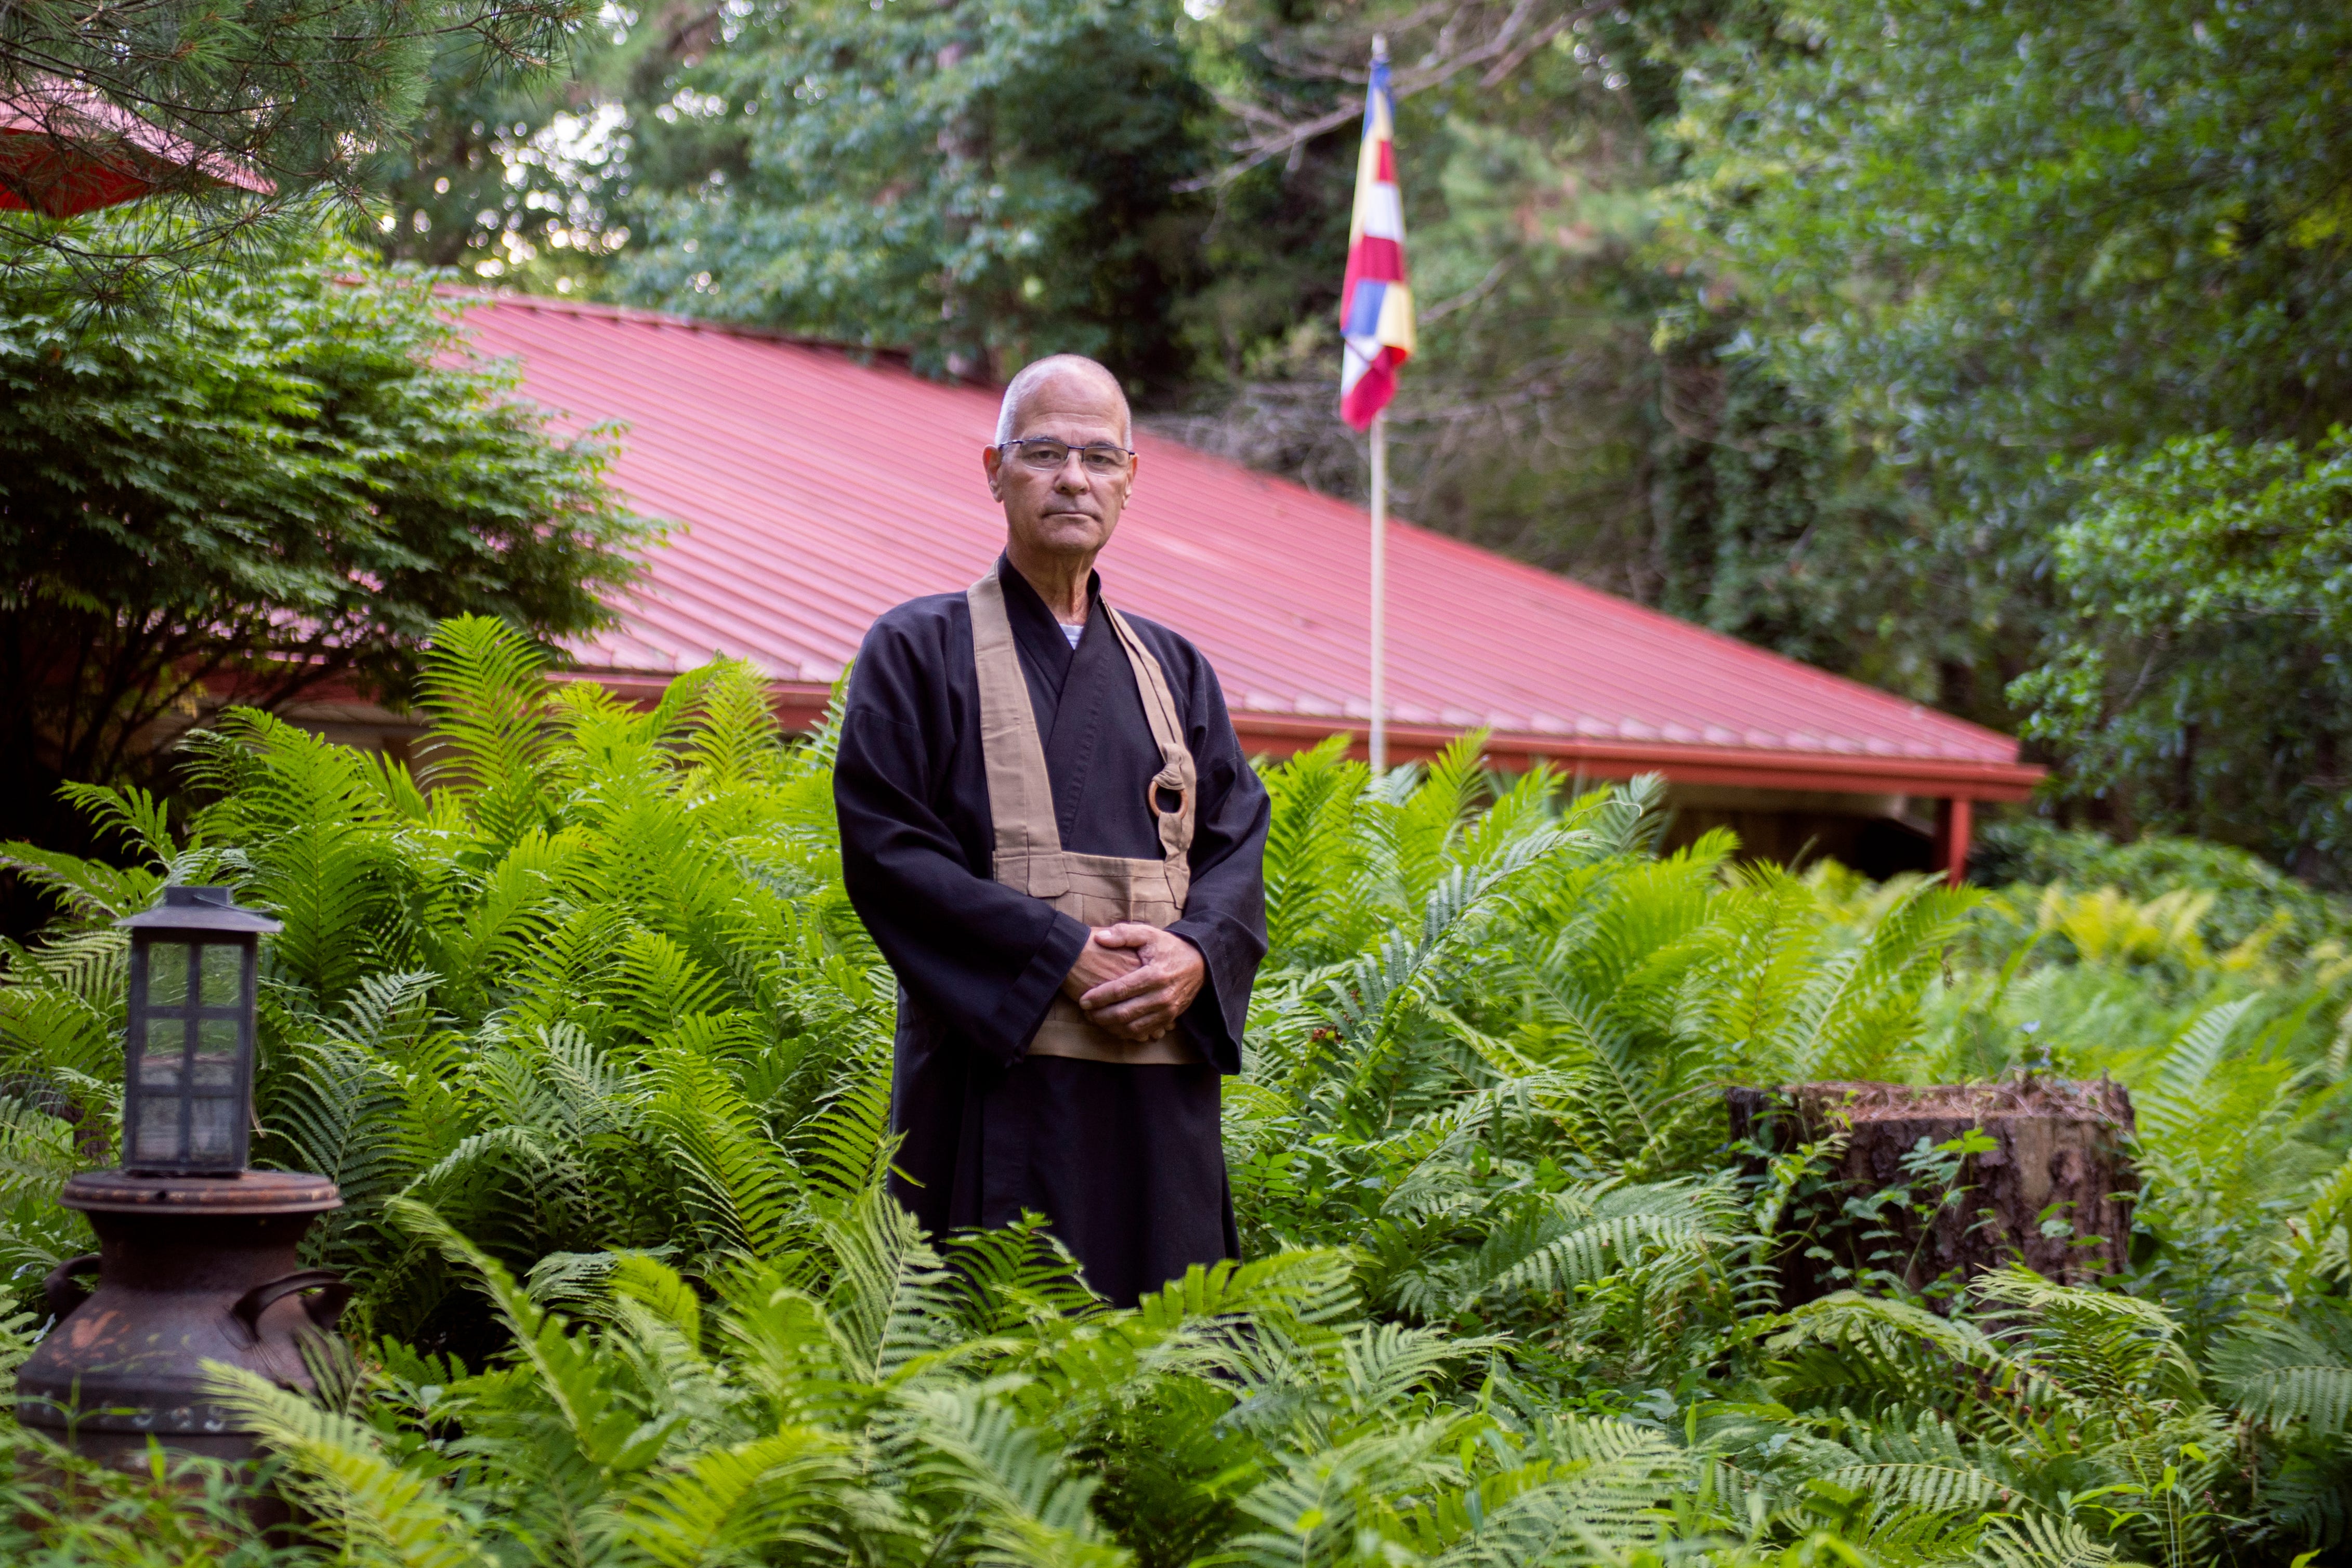 Zen Master Seijaku Roshi, poses on the Pine Wind grounds, which is also his home. Roshi founded the community in 1985, operating out of Riverton and Cinnaminson. The current community was formed in 2000 when he moved to Shamong. Roshi is currently undergoing another round of chemotherapy after a diagnosis of pancreatic cancer two years ago.